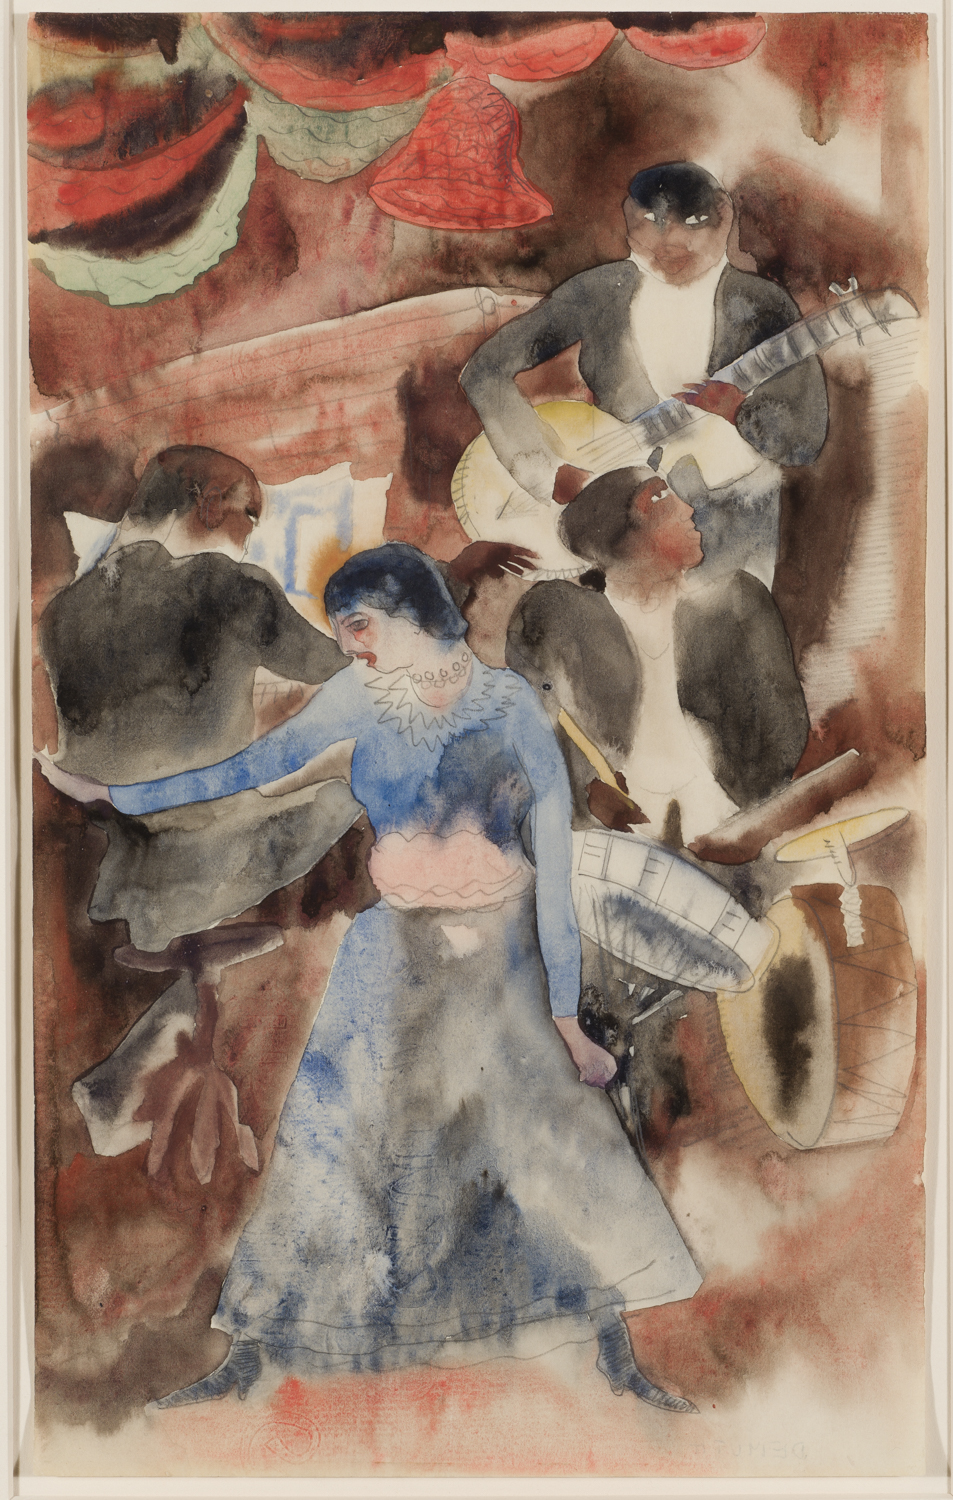 A watercolor depicting a dancing woman in a blue dress in the forefront. Behind her are several men playing various instruments.